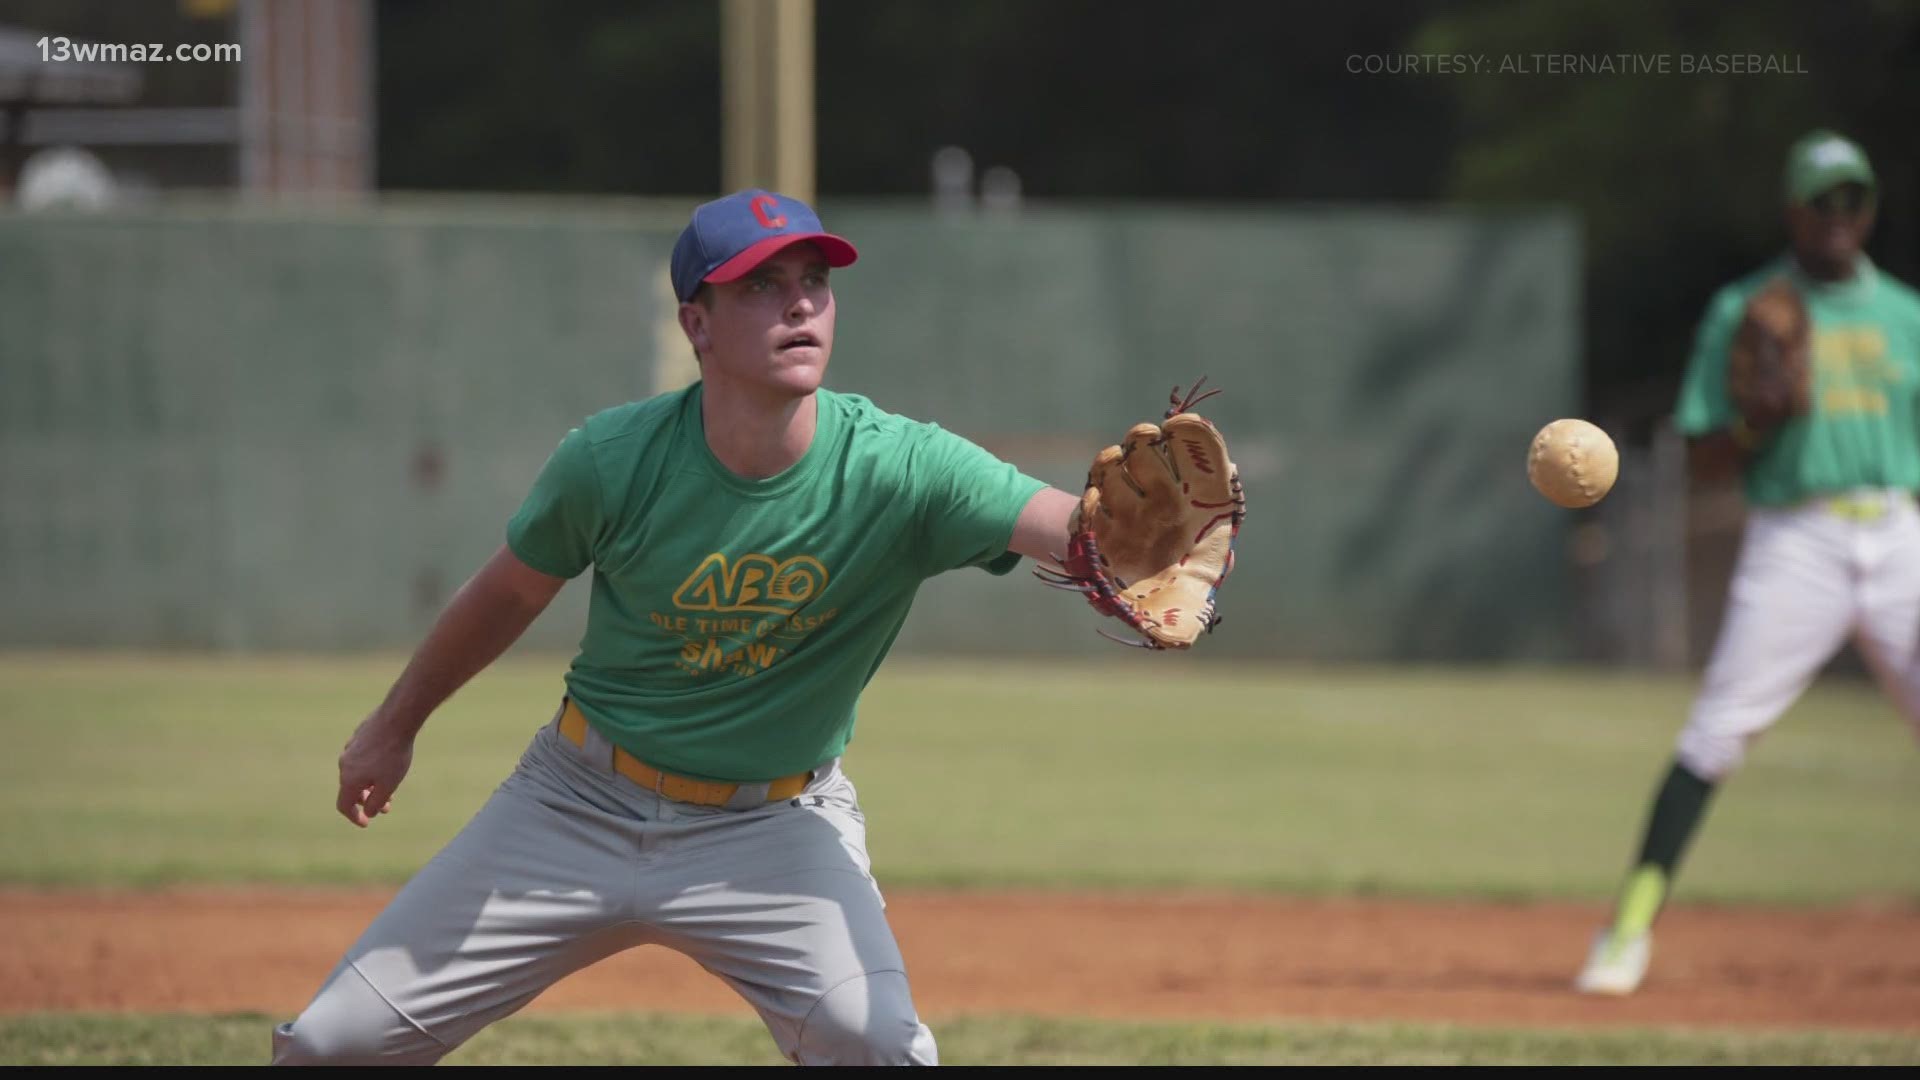 The organization provides competitive baseball for people on the autism spectrum and with other disabilities.